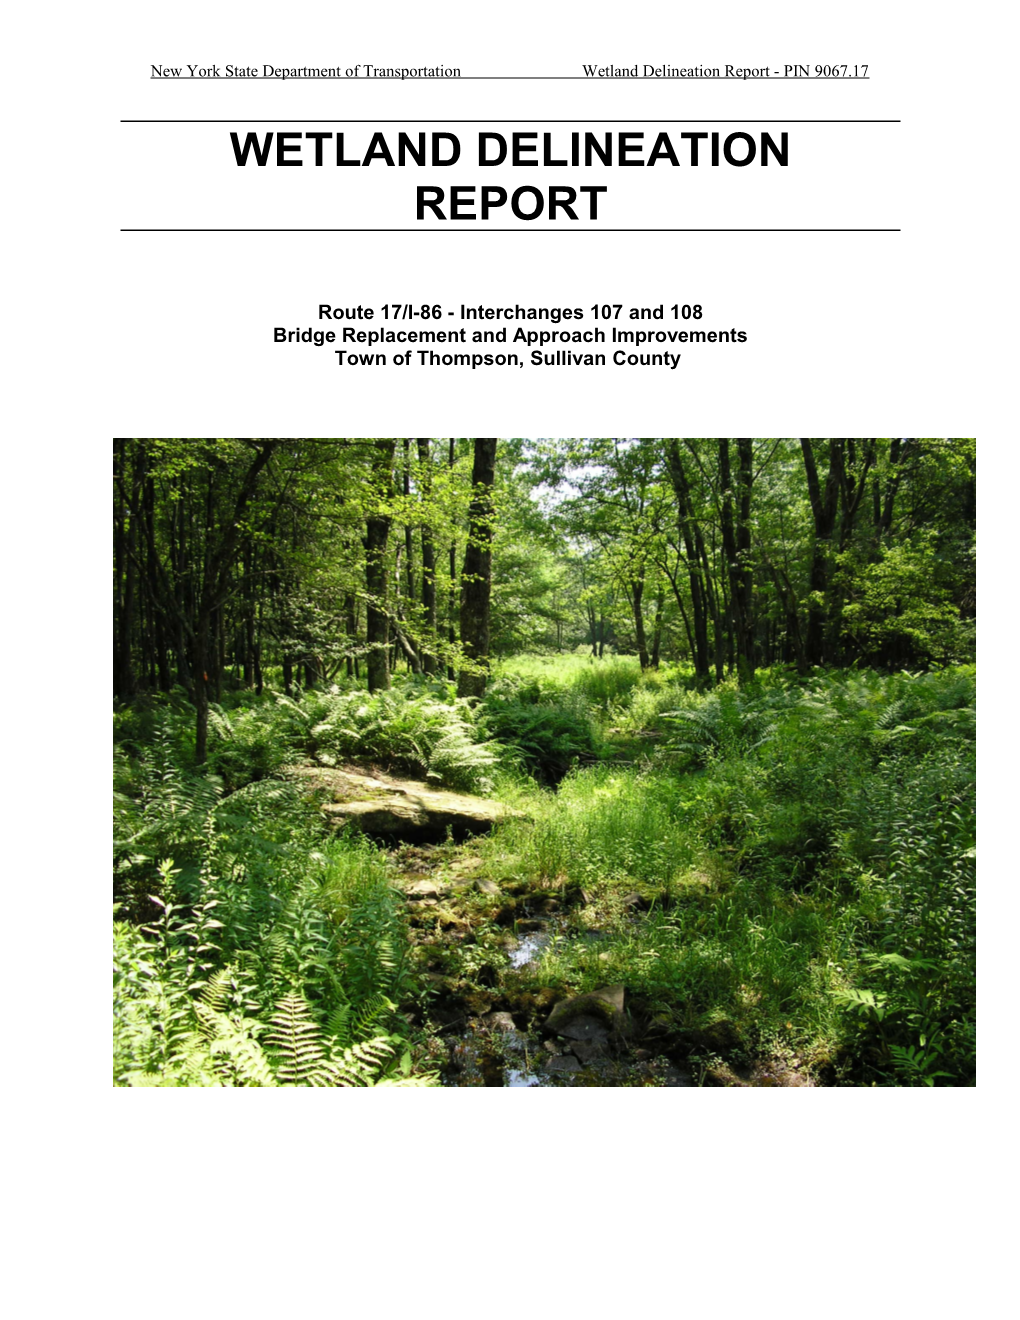 New York State Department Of Transportation Wetland Delineation Report - PIN 1041